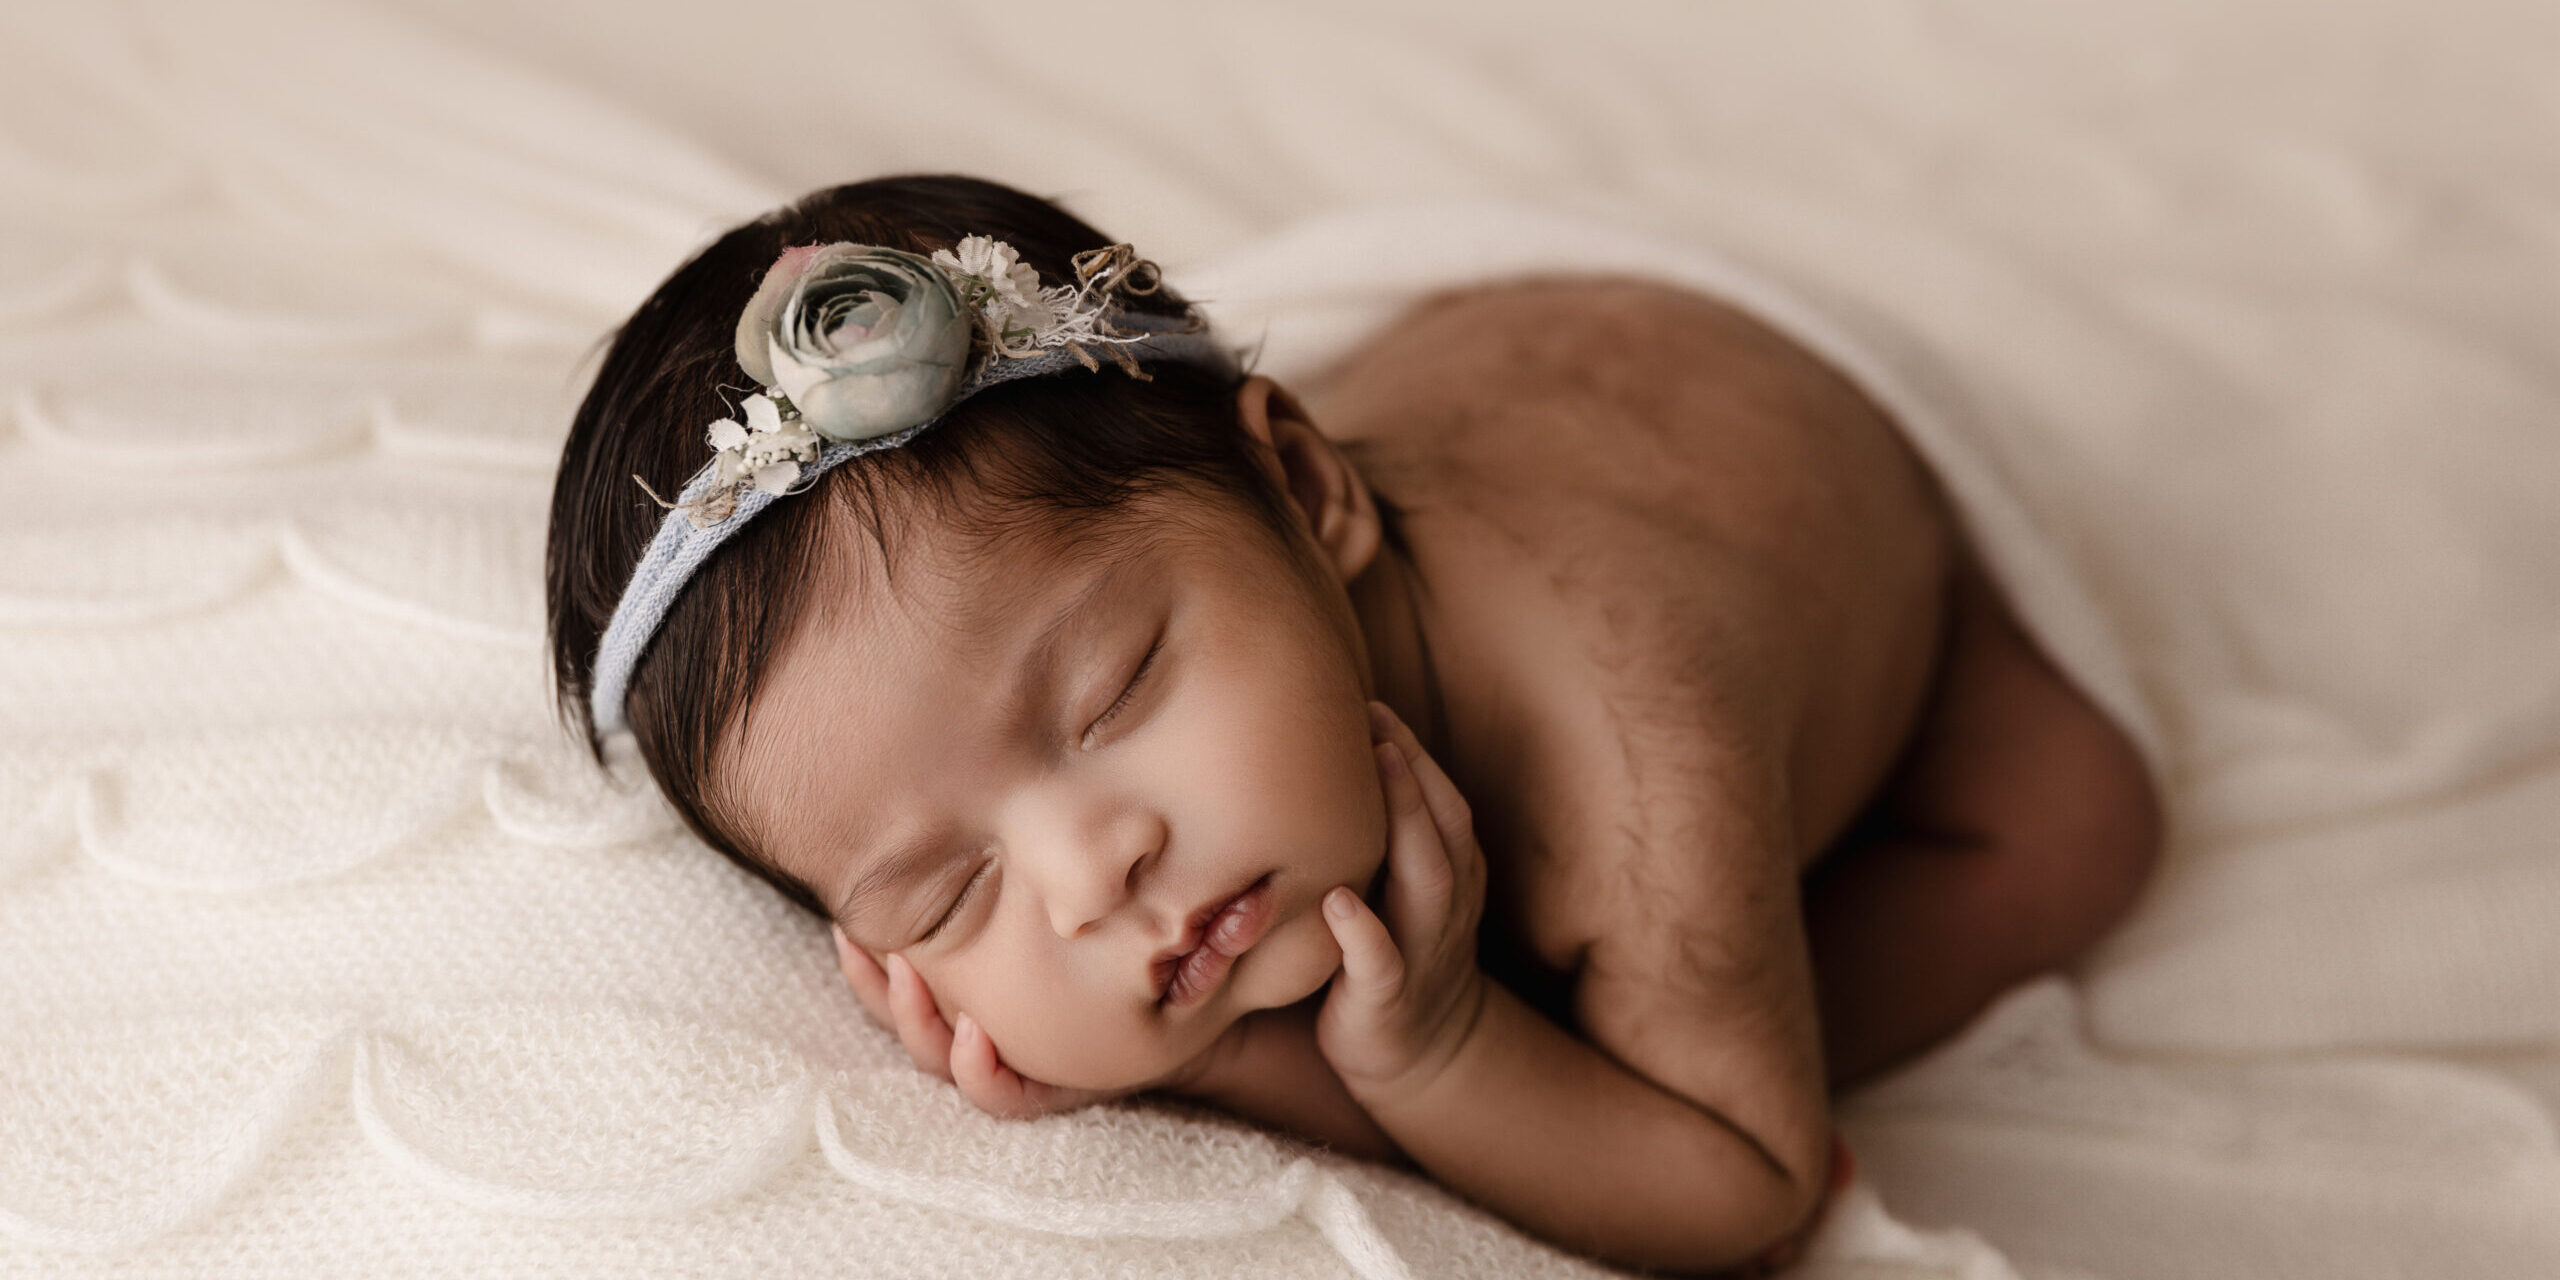 picture of newborn baby wearing a blue floral headband and laying on a white ruffle backdrop during a newborn photoshoot